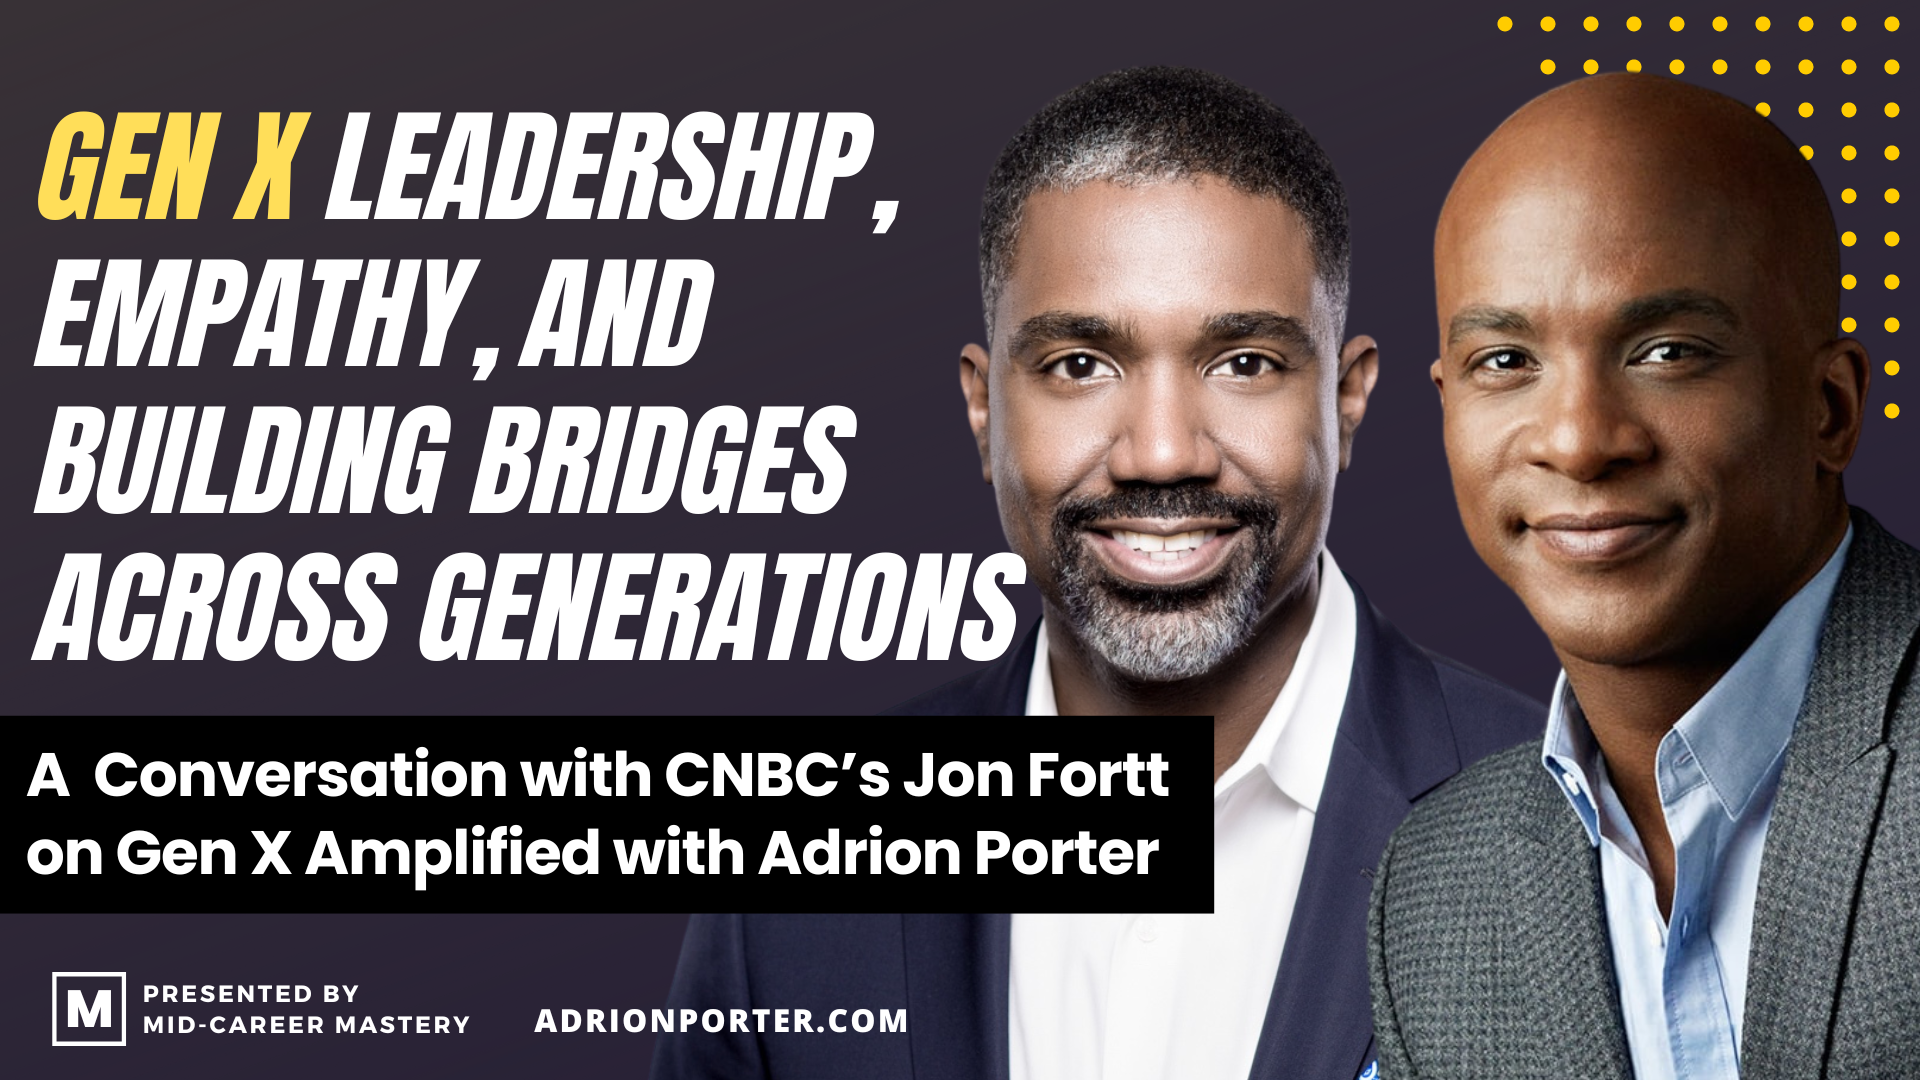 CNBC’s Jon Fortt with Adrion Porter on Gen X Leadership and Building Generational Bridges